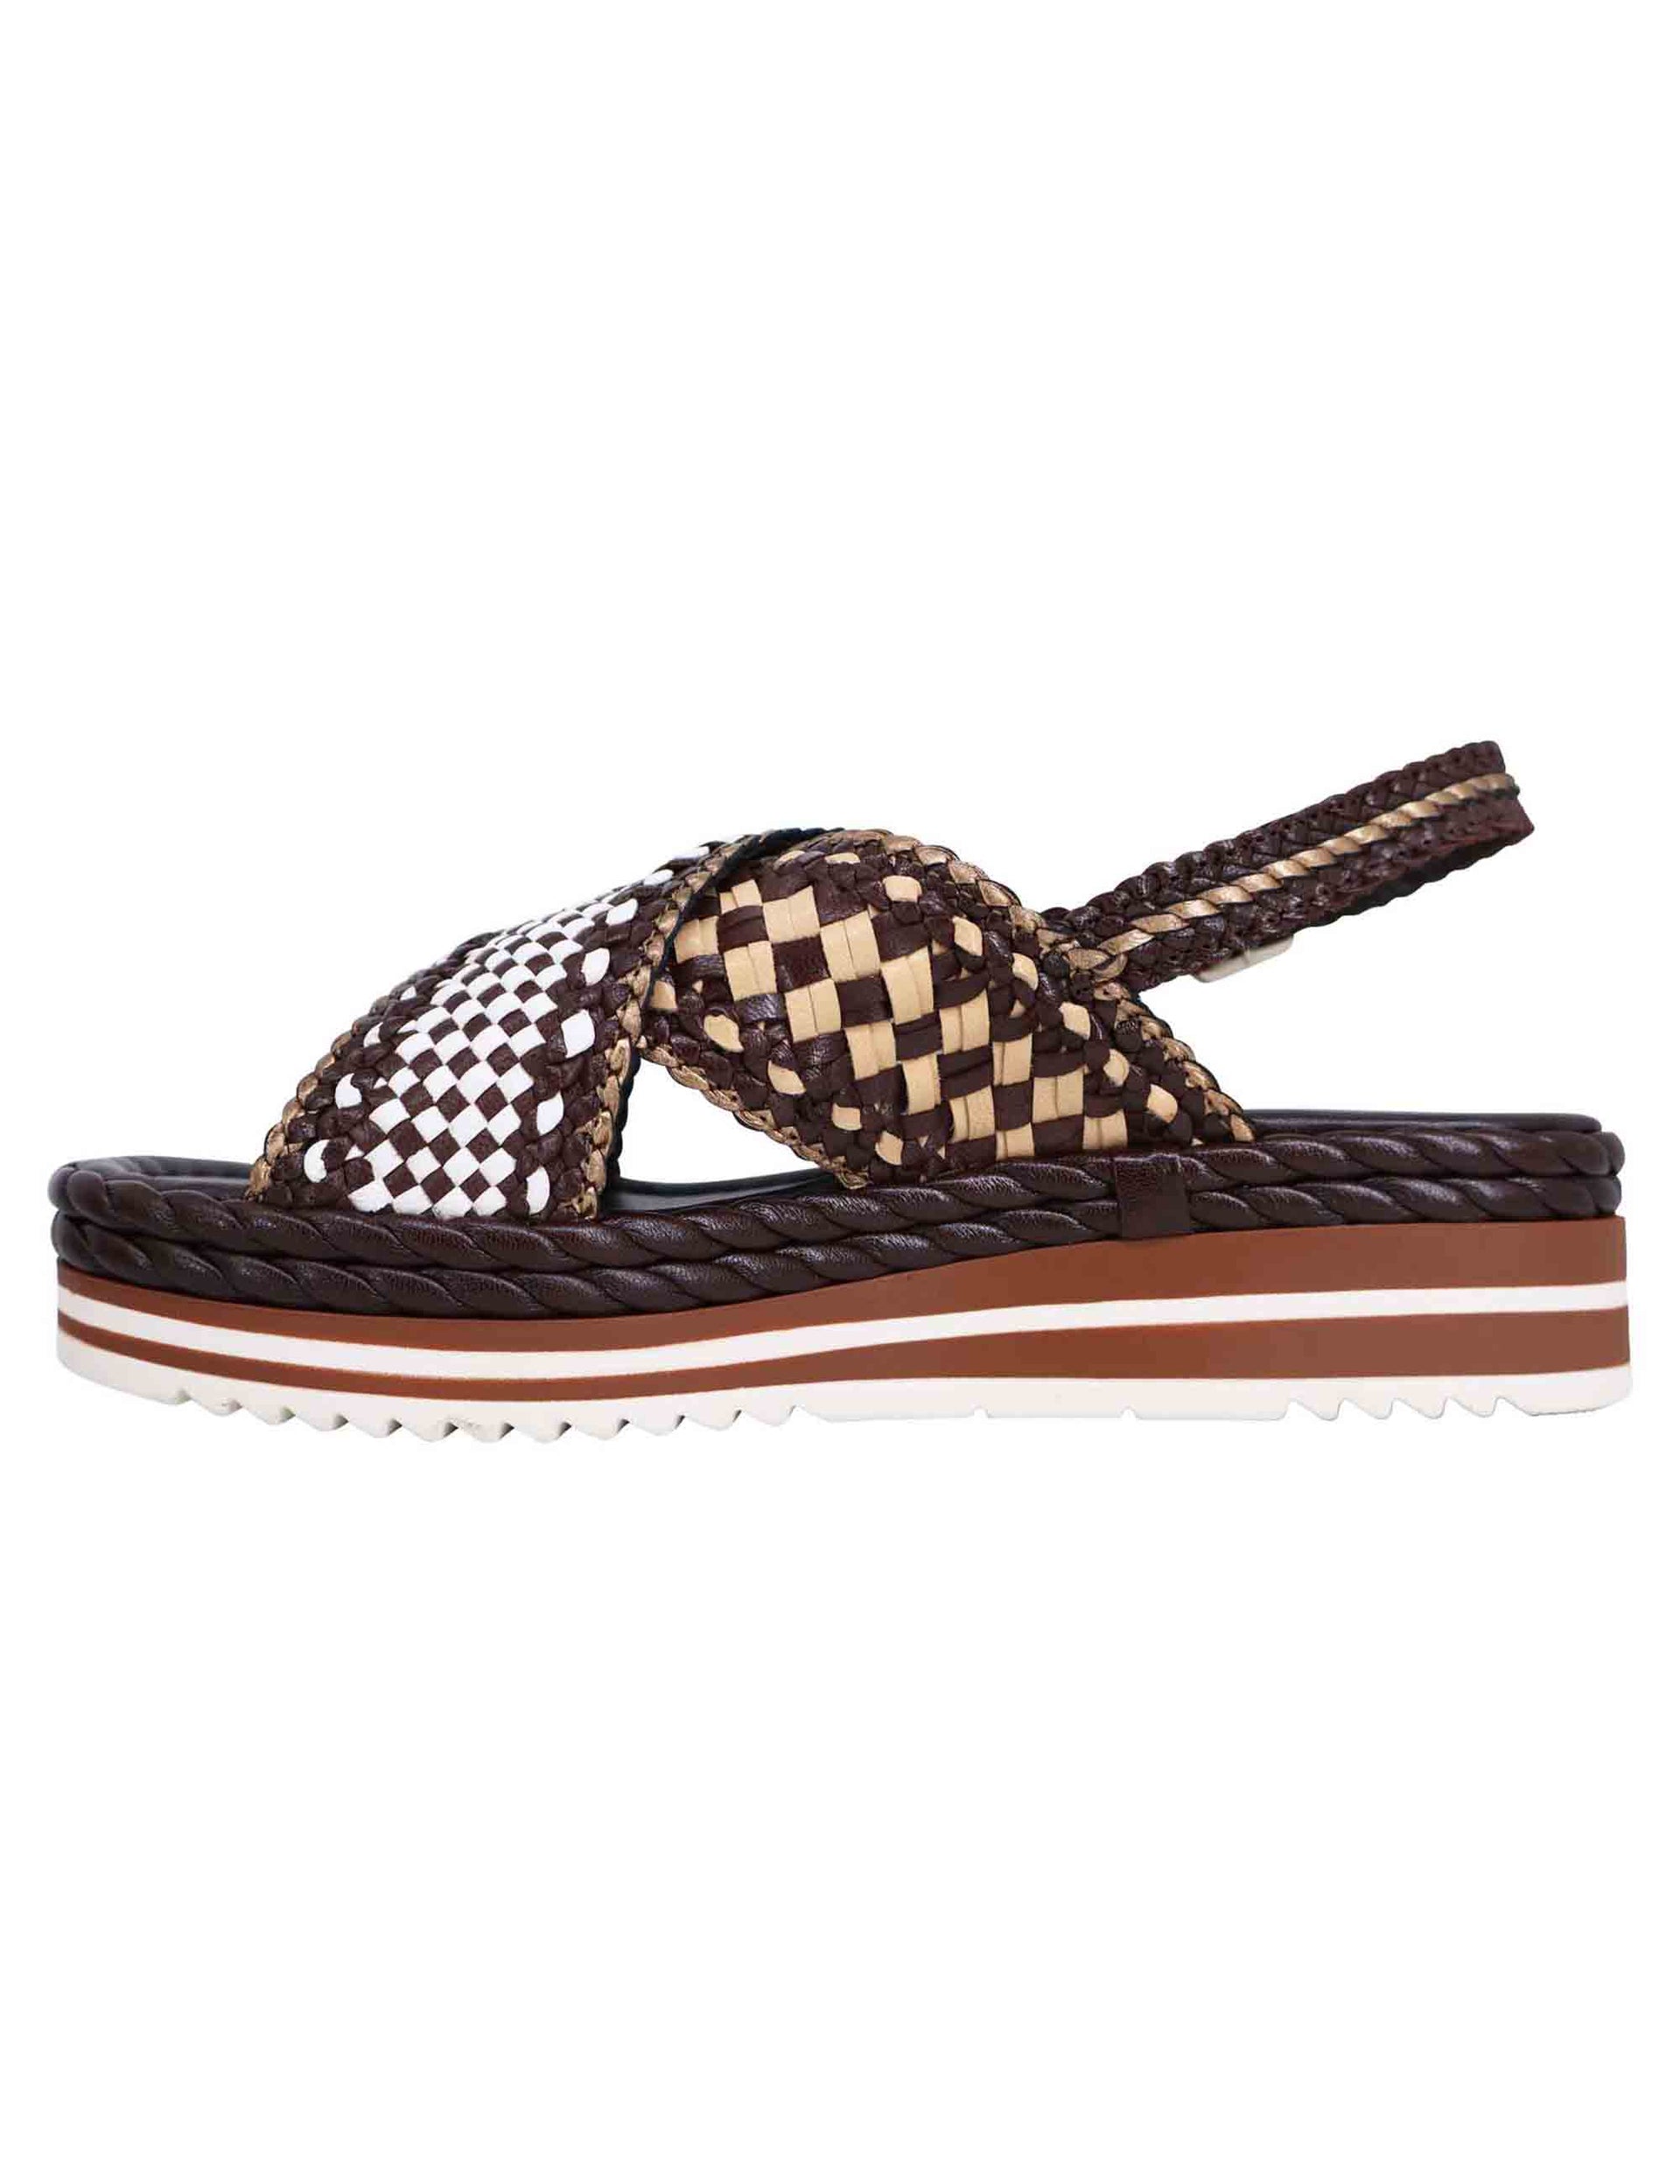 Women's slingback sandals in dark woven leather with rubber wedge